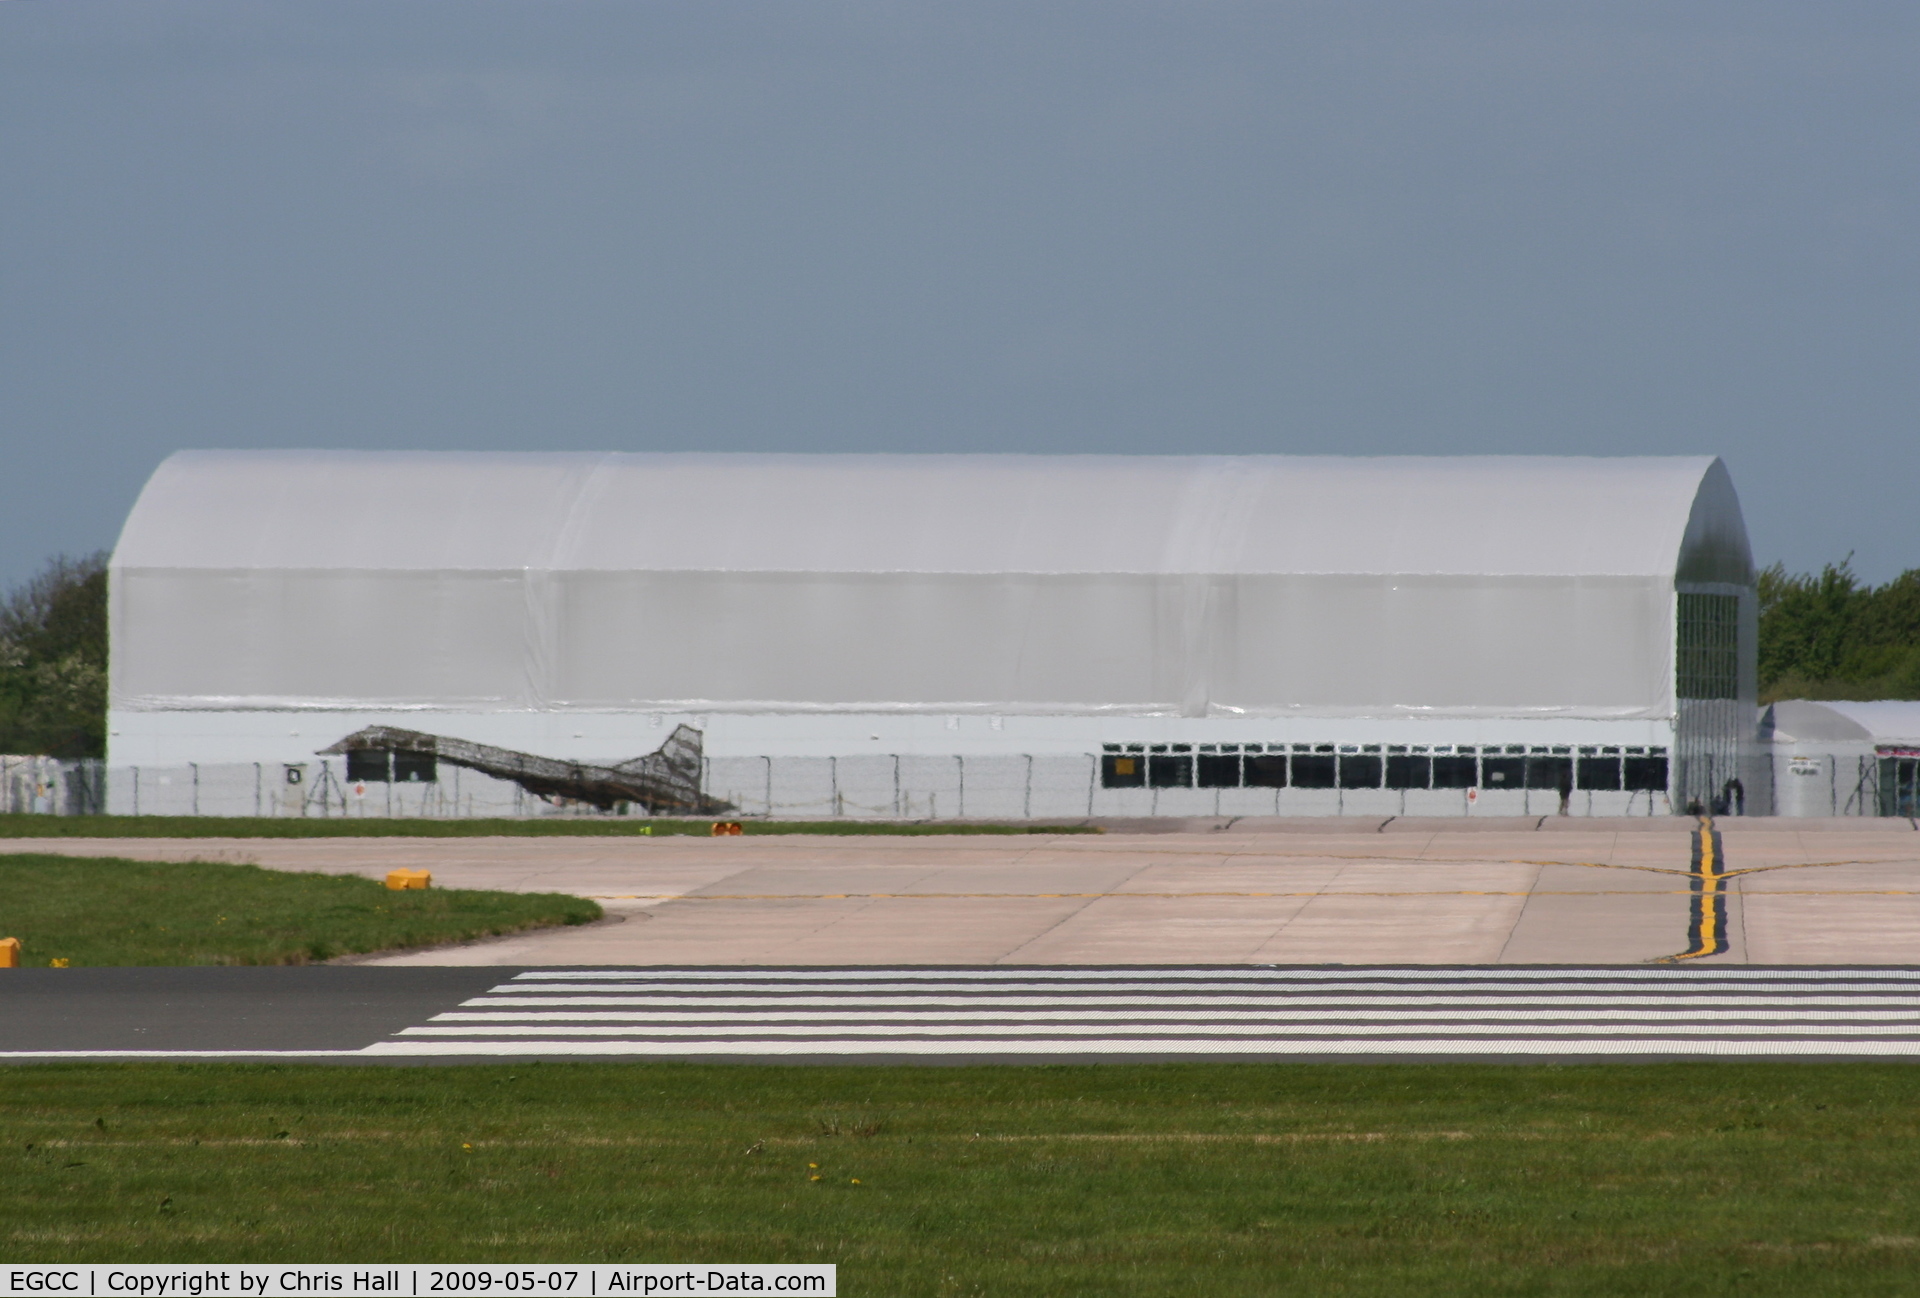 Manchester Airport, Manchester, England United Kingdom (EGCC) - The new 'hangar' that now houses Concorde G-BOAC